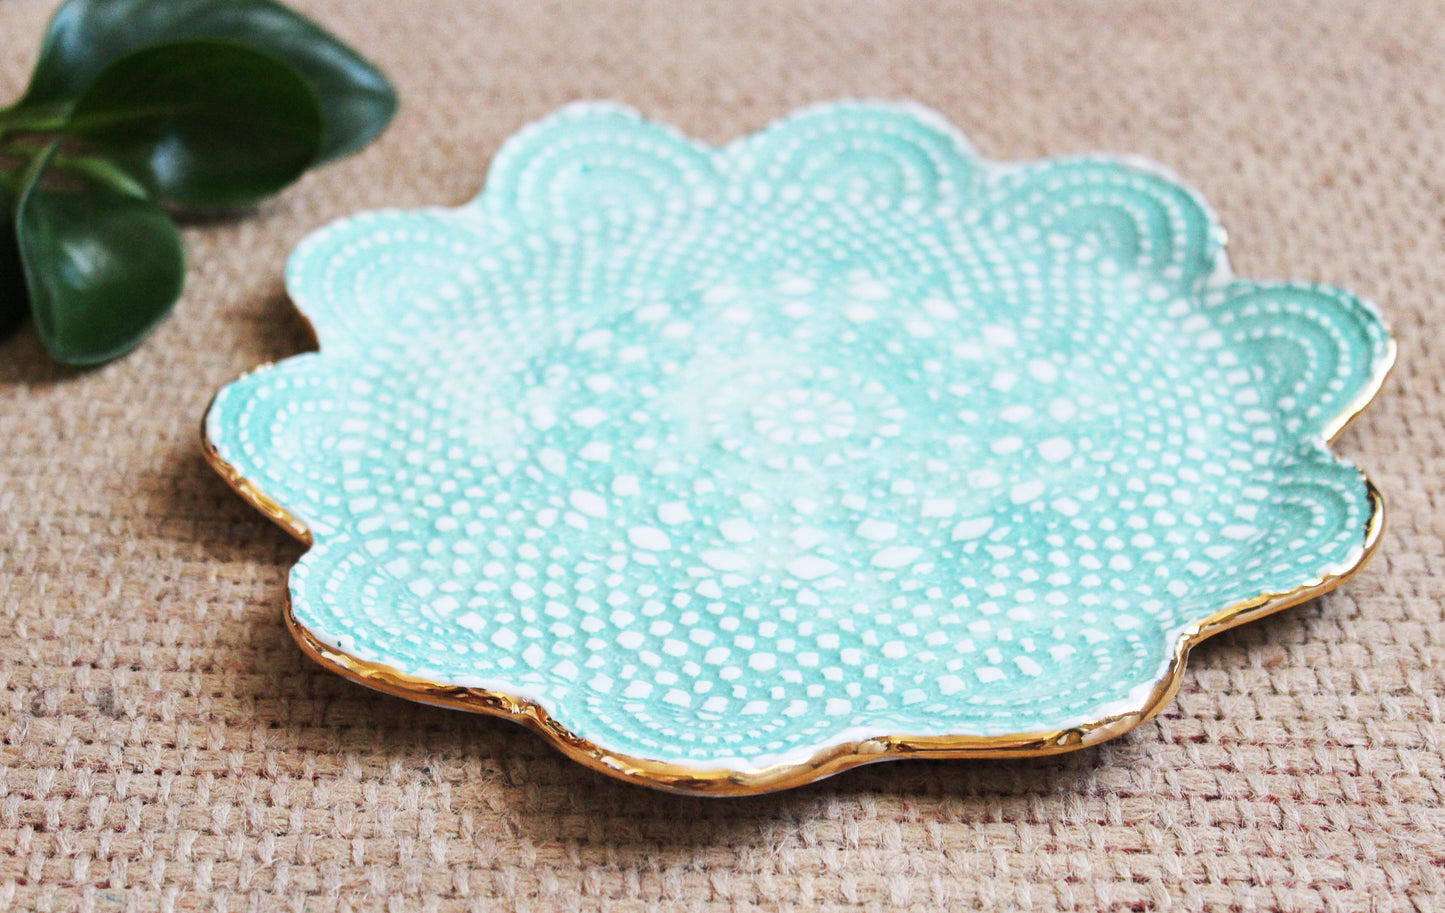 Flower Doily Plate with Lustre Rim